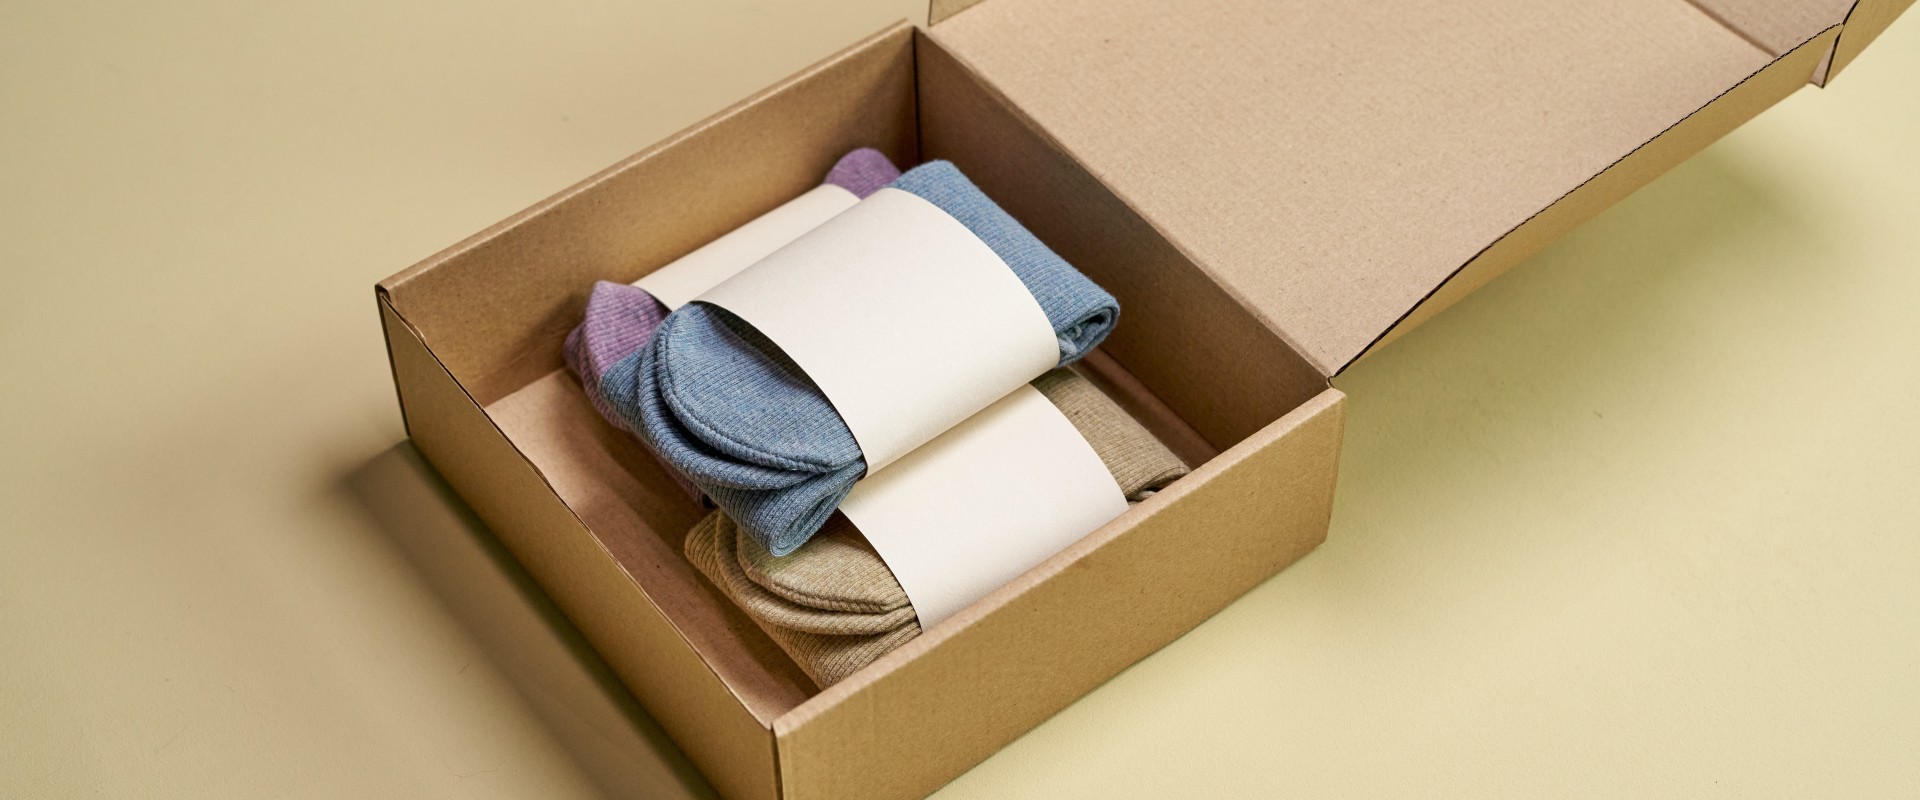 Labeling Boxes Correctly: A Guide for Packing Materials and Supplies